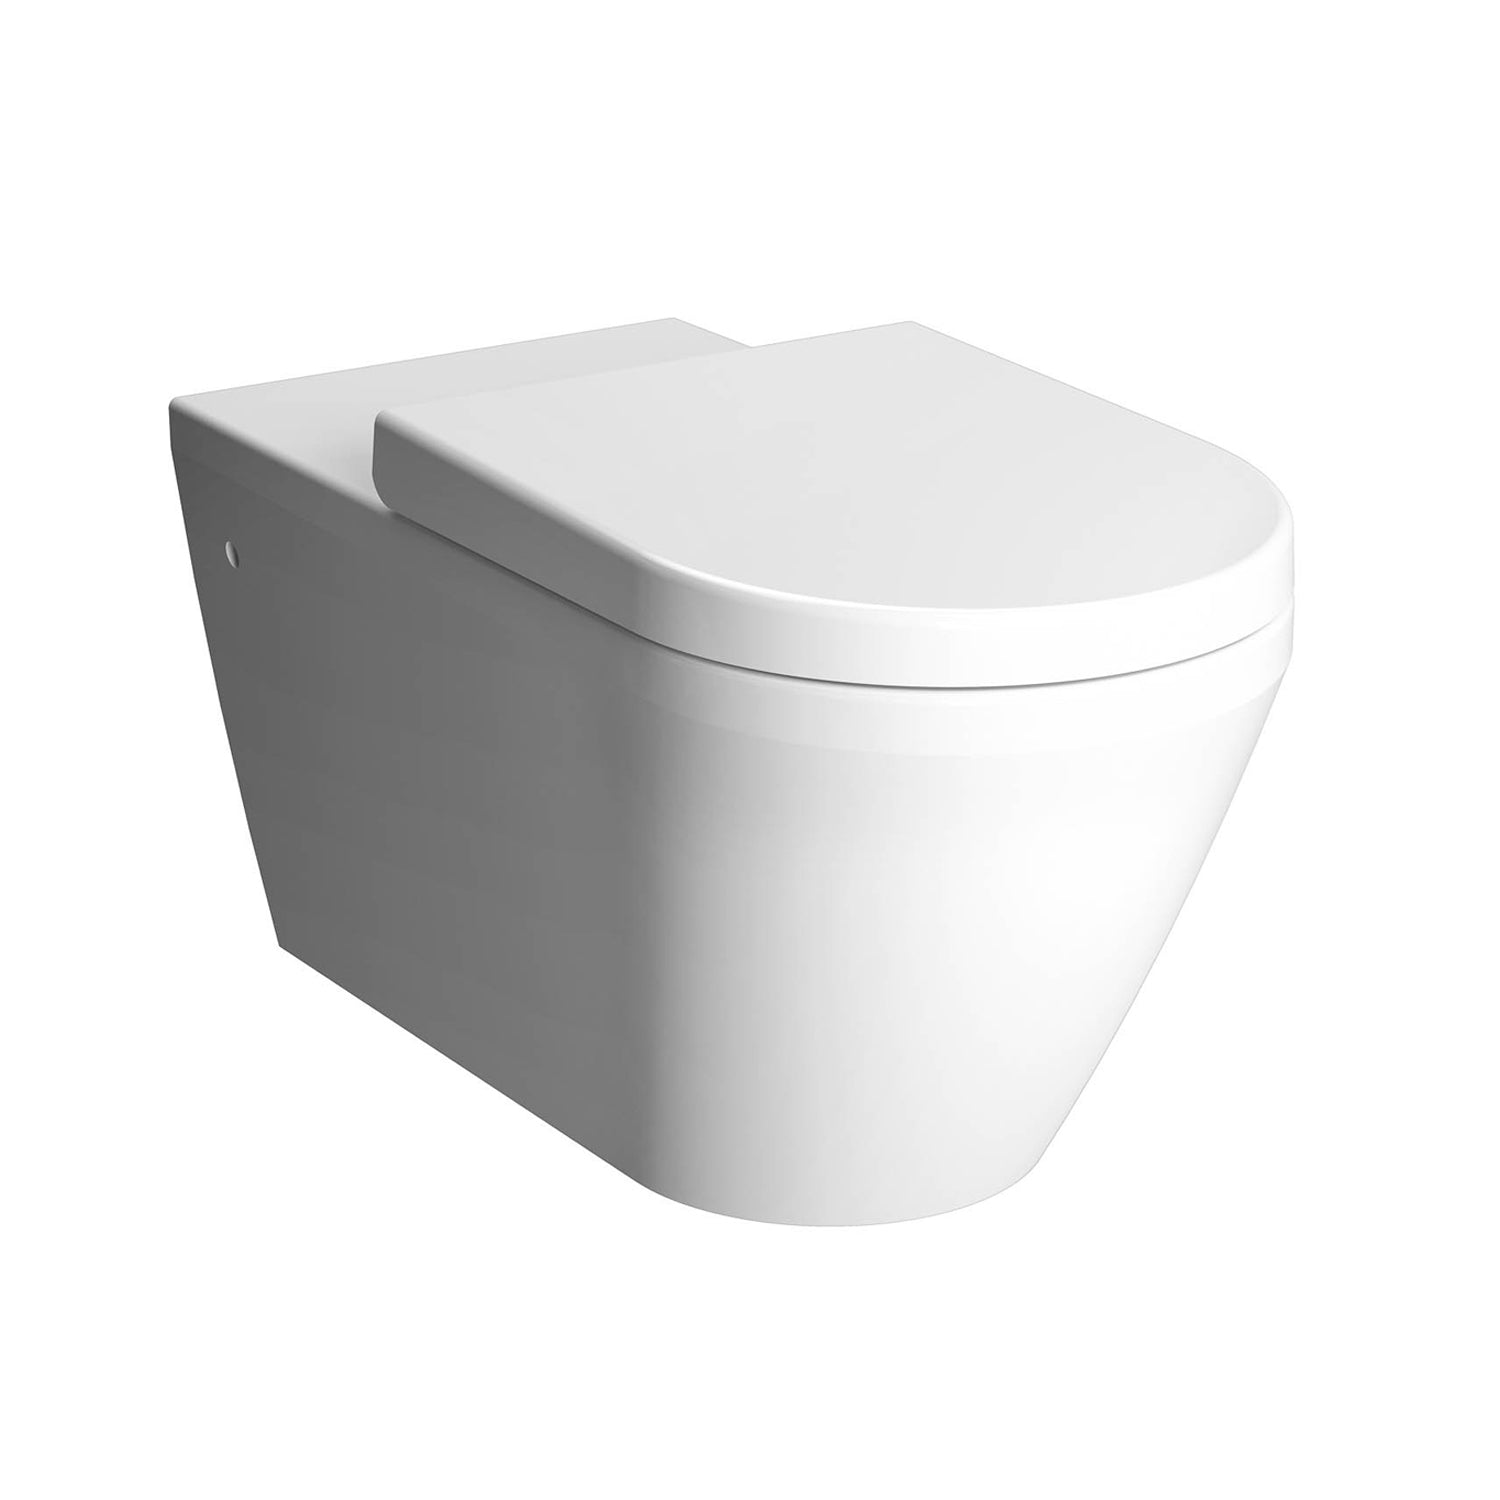 700mm Vesta Long Projection Wall Hung Toilet with a seat and cover on a white background